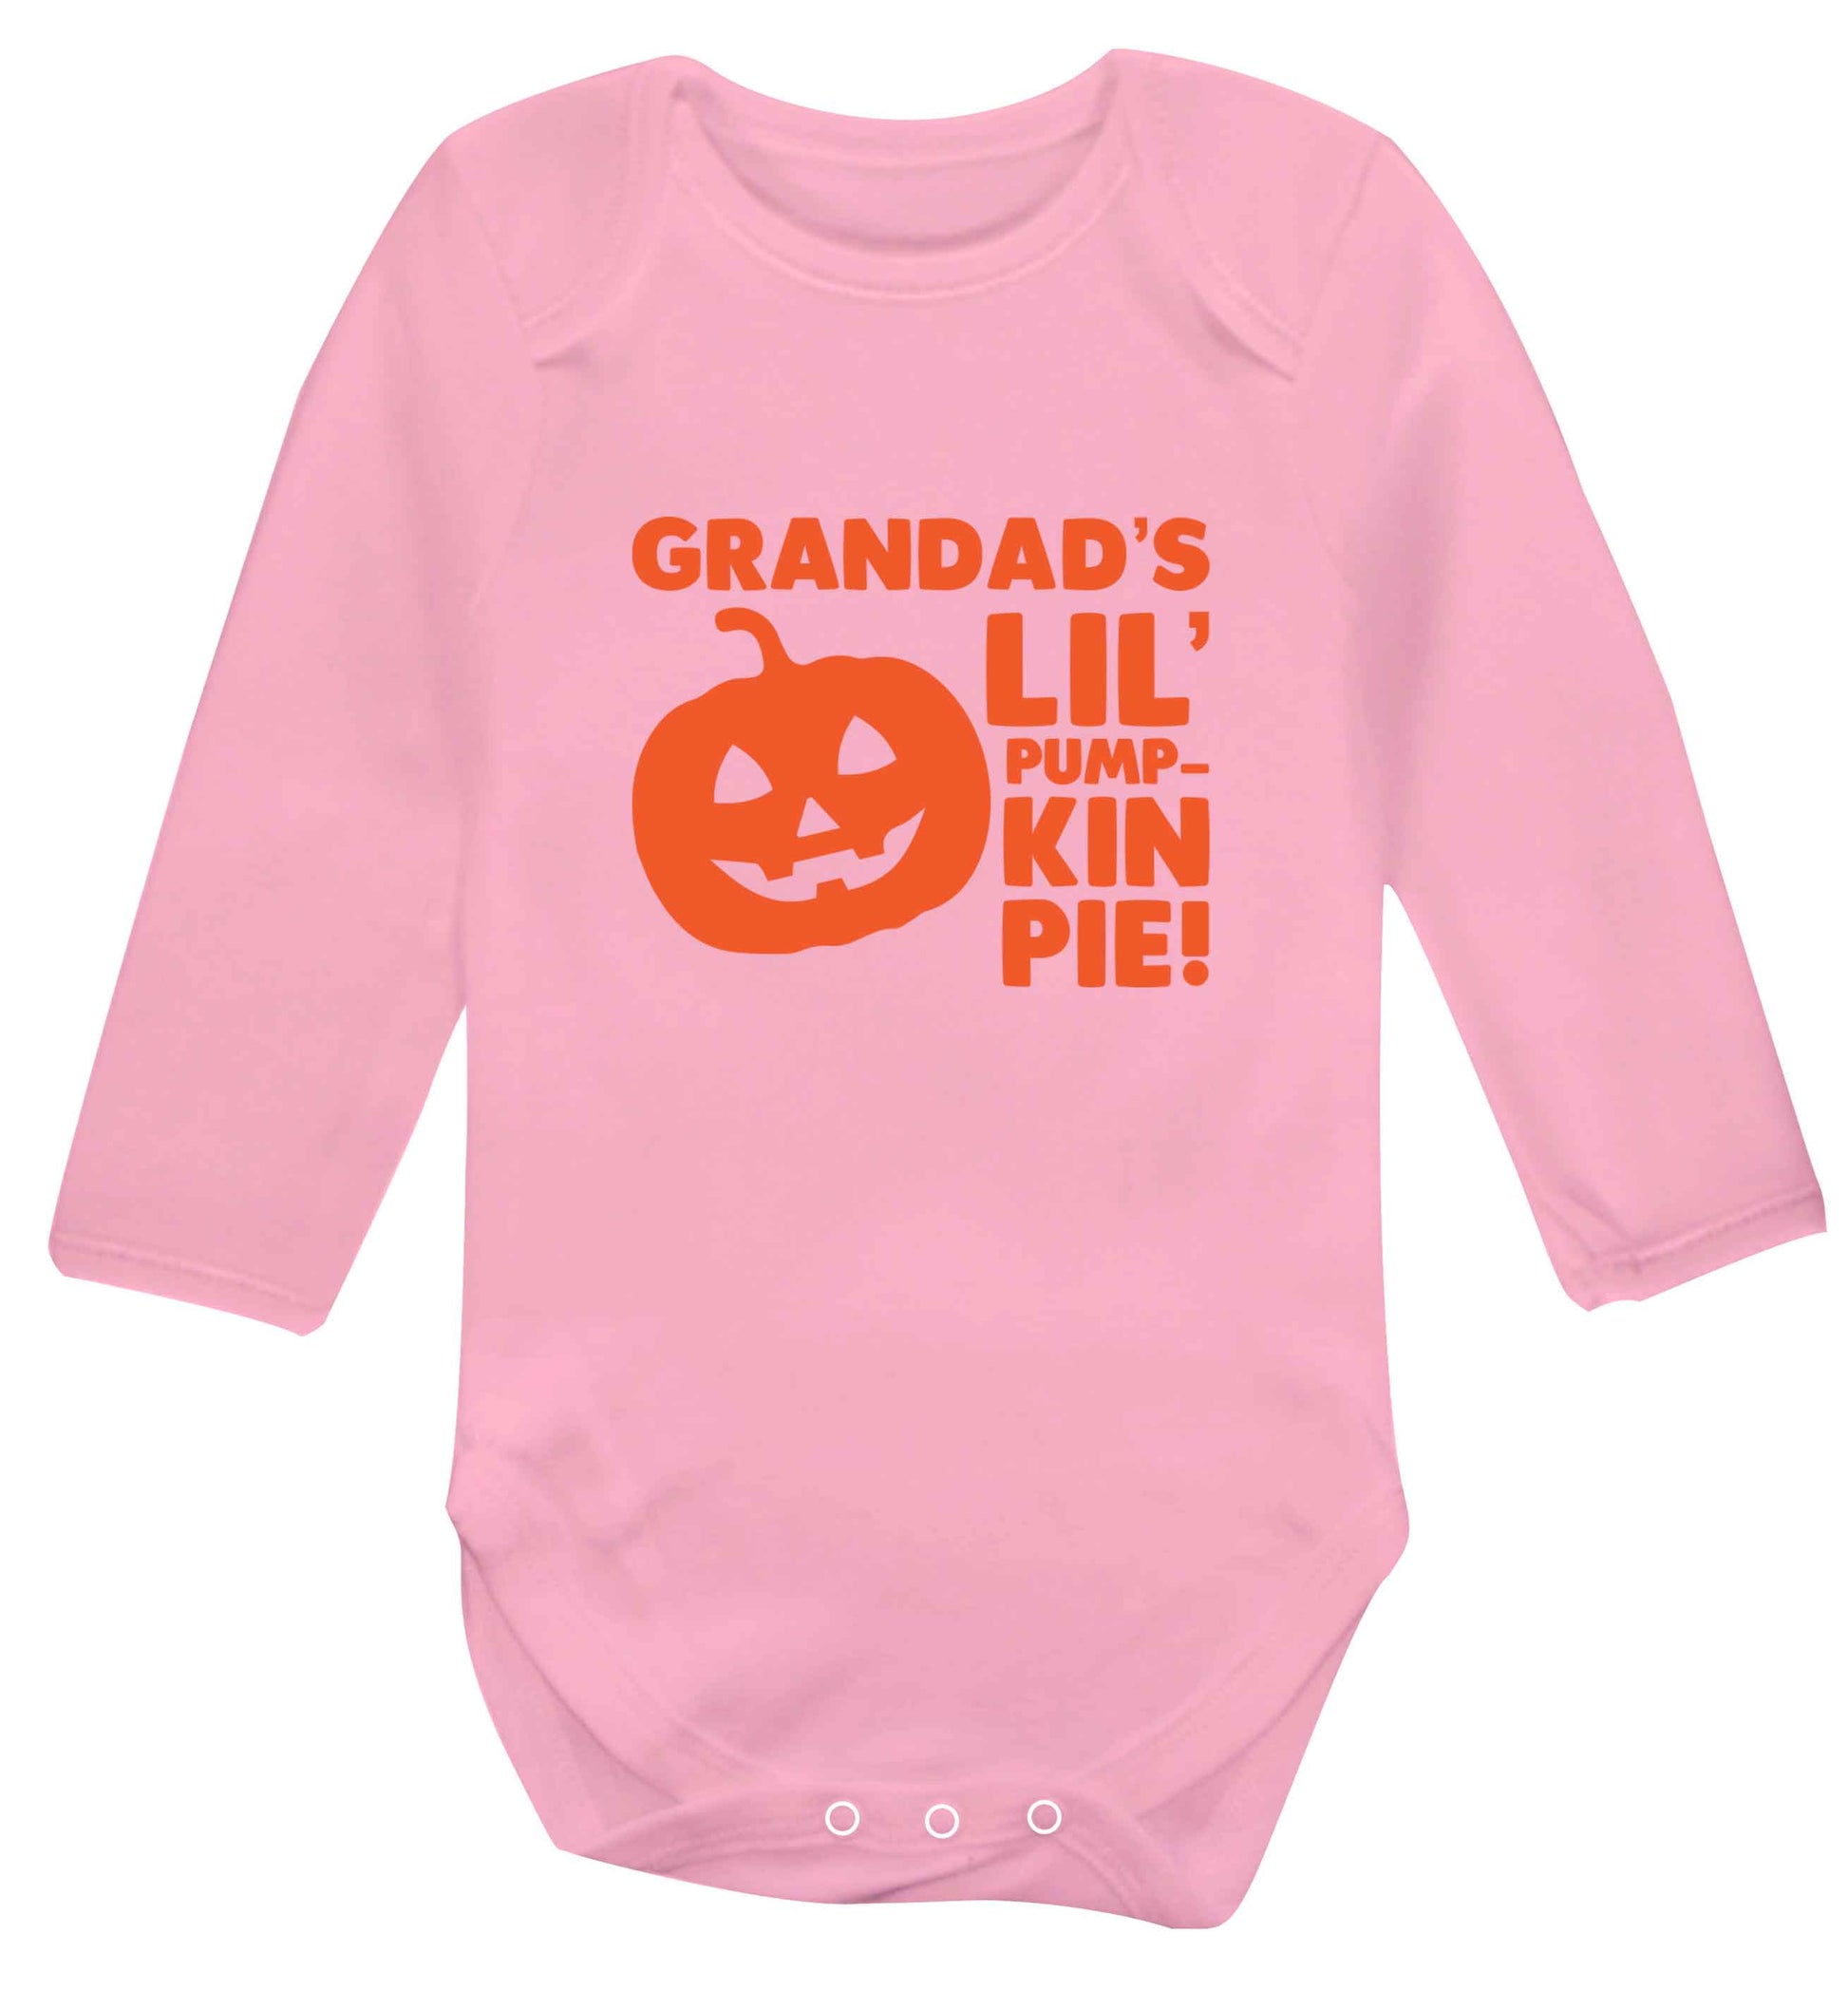 Daddy's lil' pumpkin pie baby vest long sleeved pale pink 6-12 months